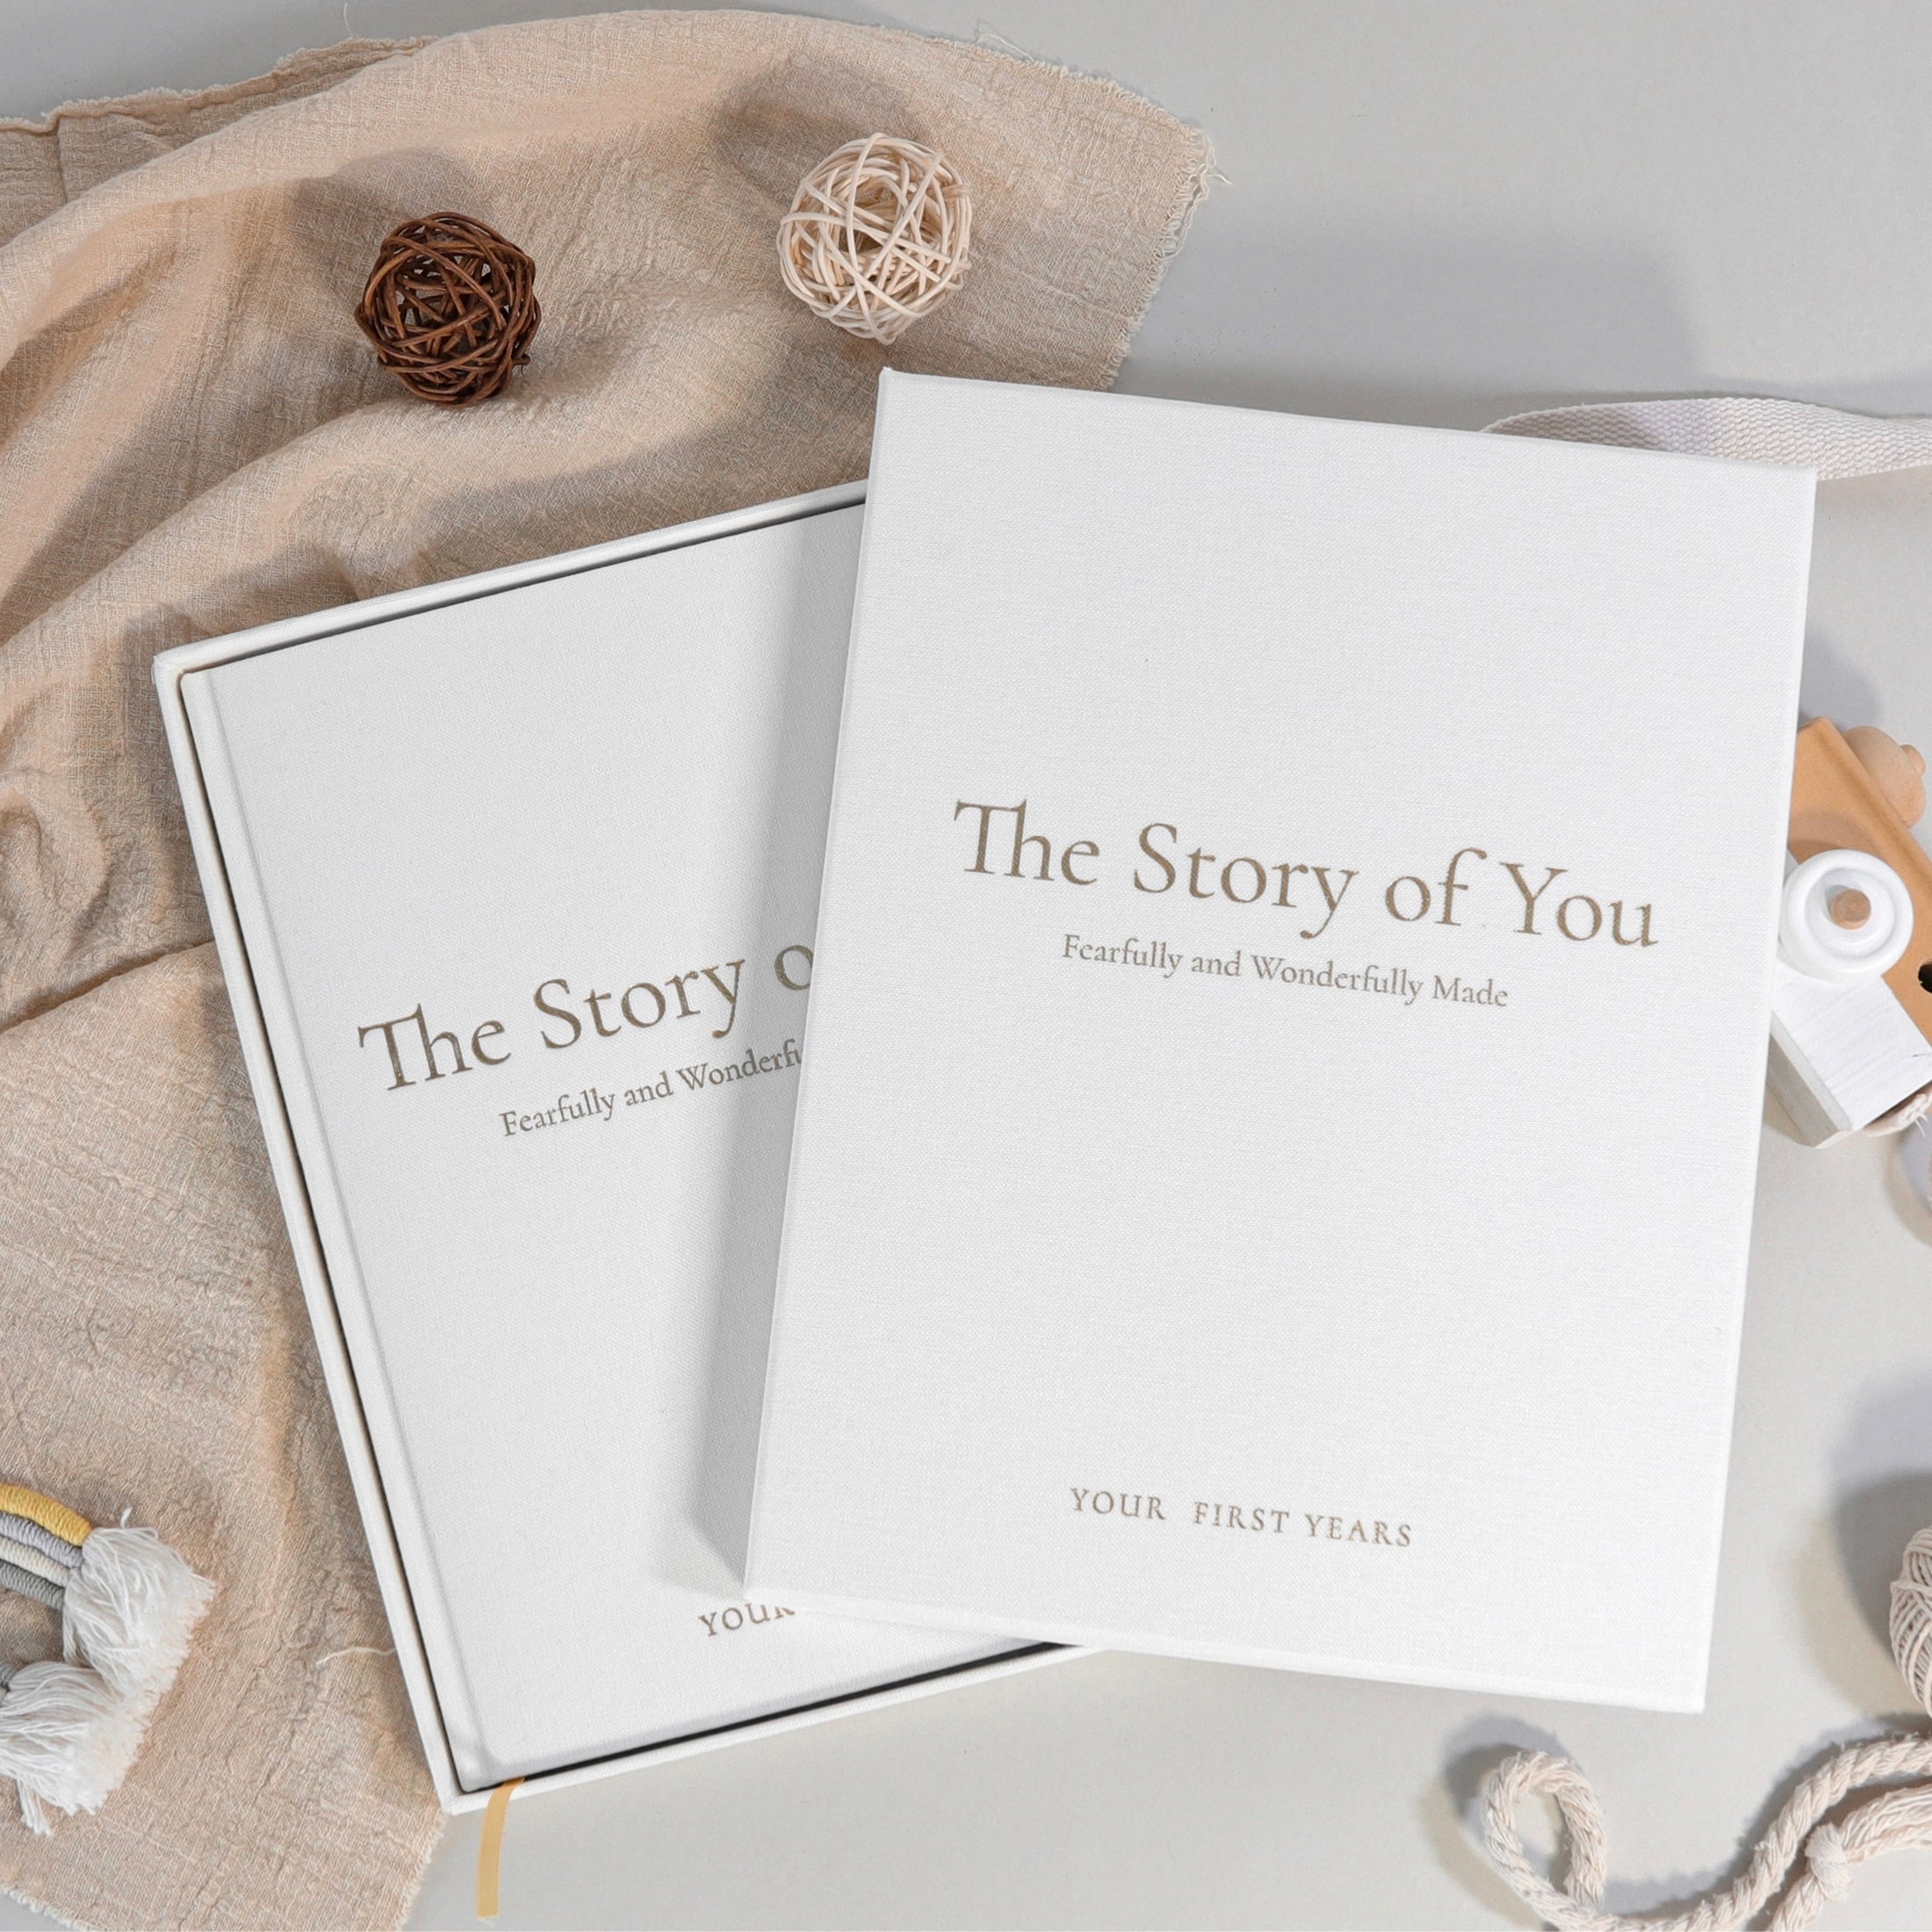 The Story of You: Fearfully and Wonderfully Made (Forest Friends) - Linen Baby Keepsake Book with Storage Box